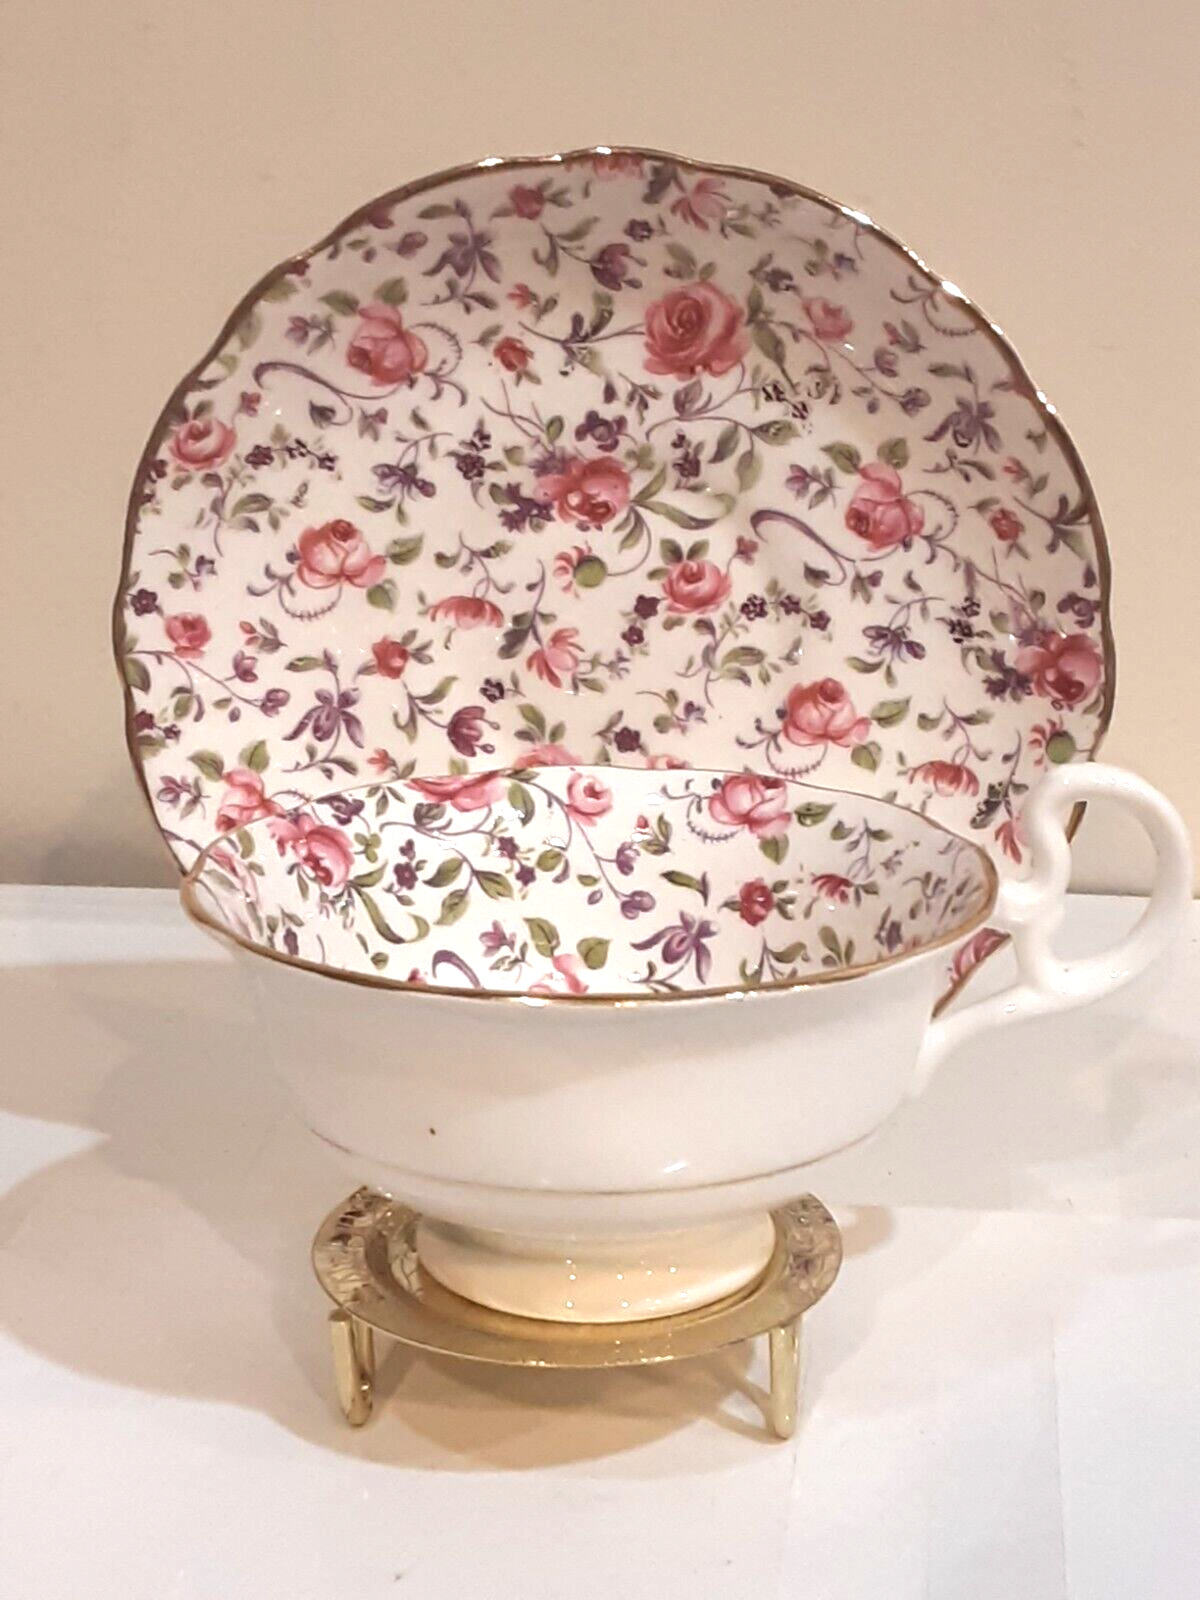 RADFORDS BONE CHINA TEACUP AND SAUCER MADE IN ENGLAND